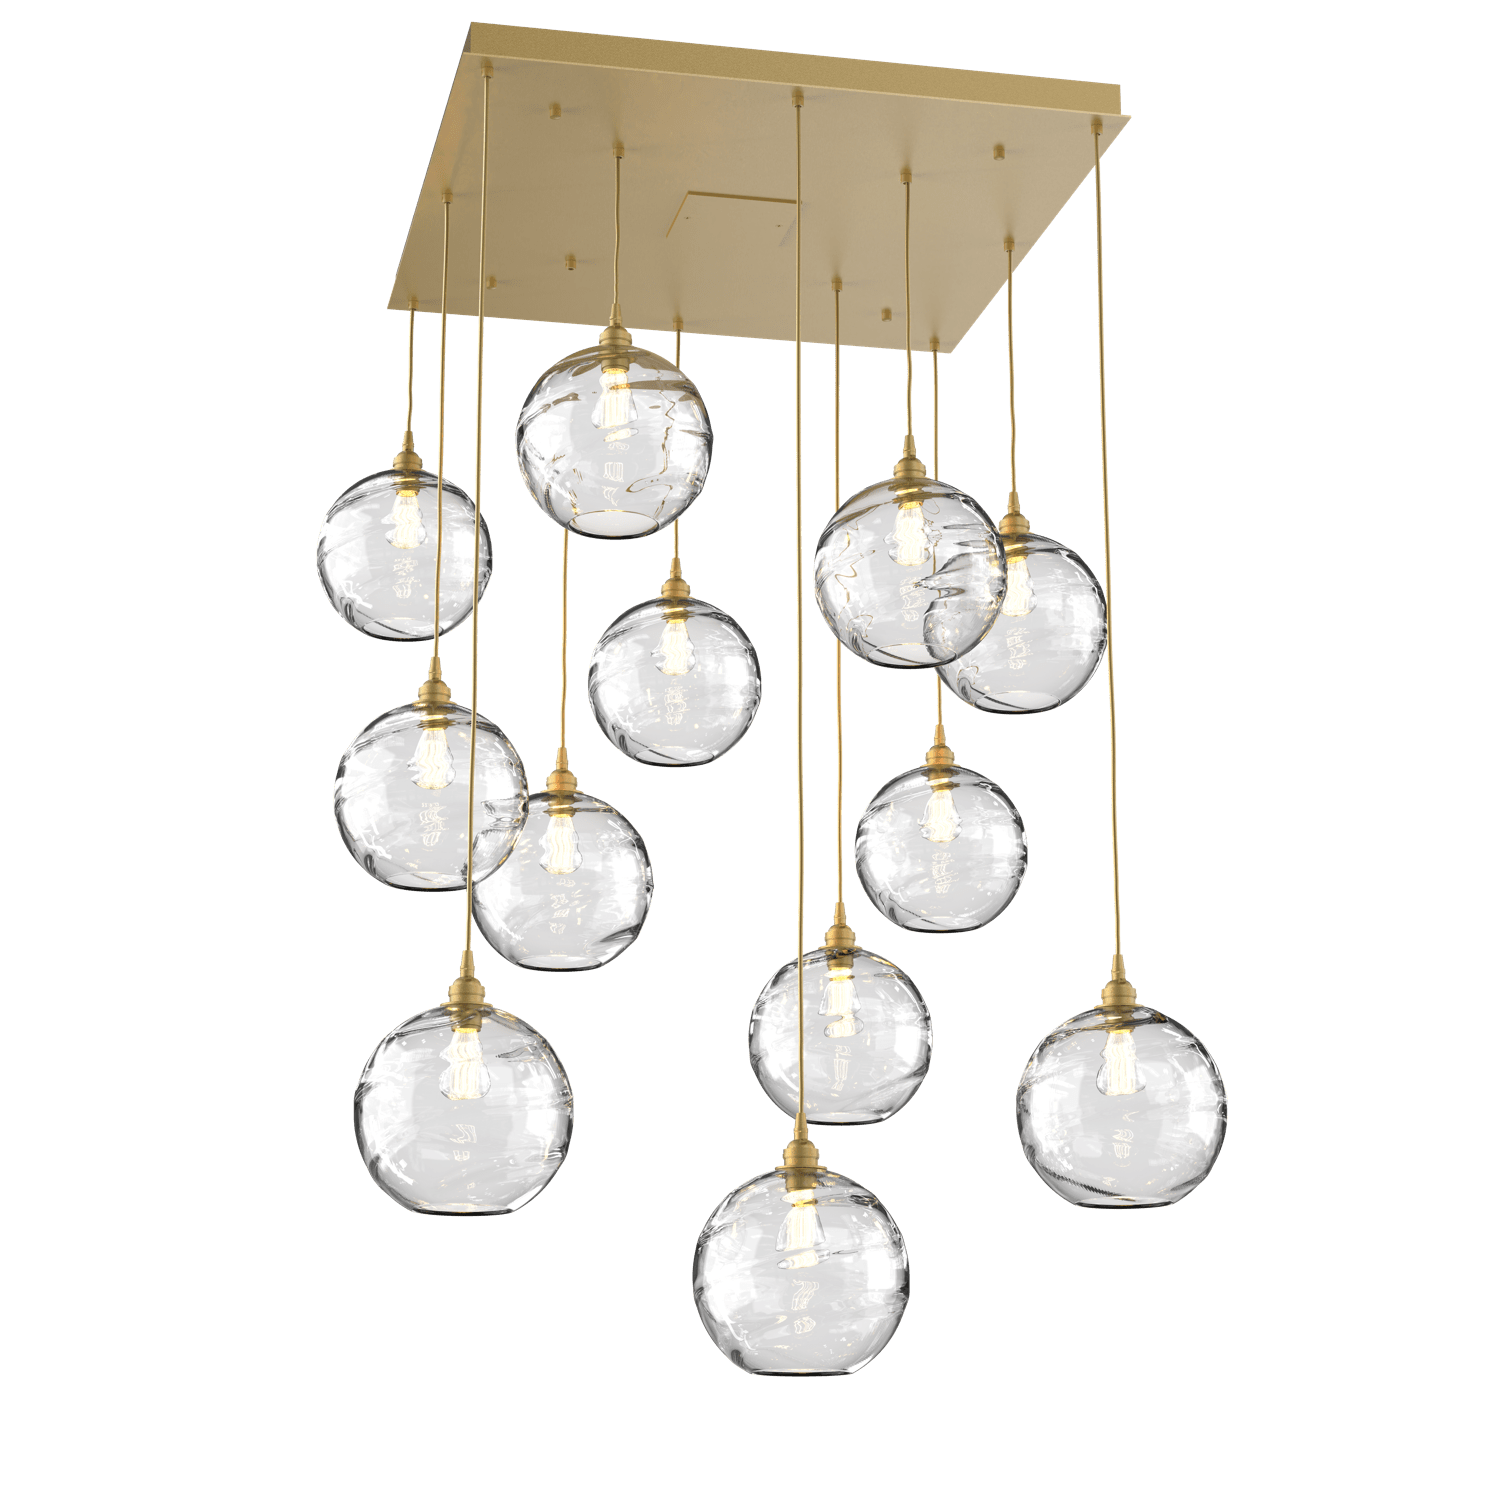 CHB0047-12-GB-OC-Hammerton-Studio-Optic-Blown-Glass-Terra-12-light-square-pendant-chandelier-with-gilded-brass-finish-and-optic-clear-blown-glass-shades-and-incandescent-lamping